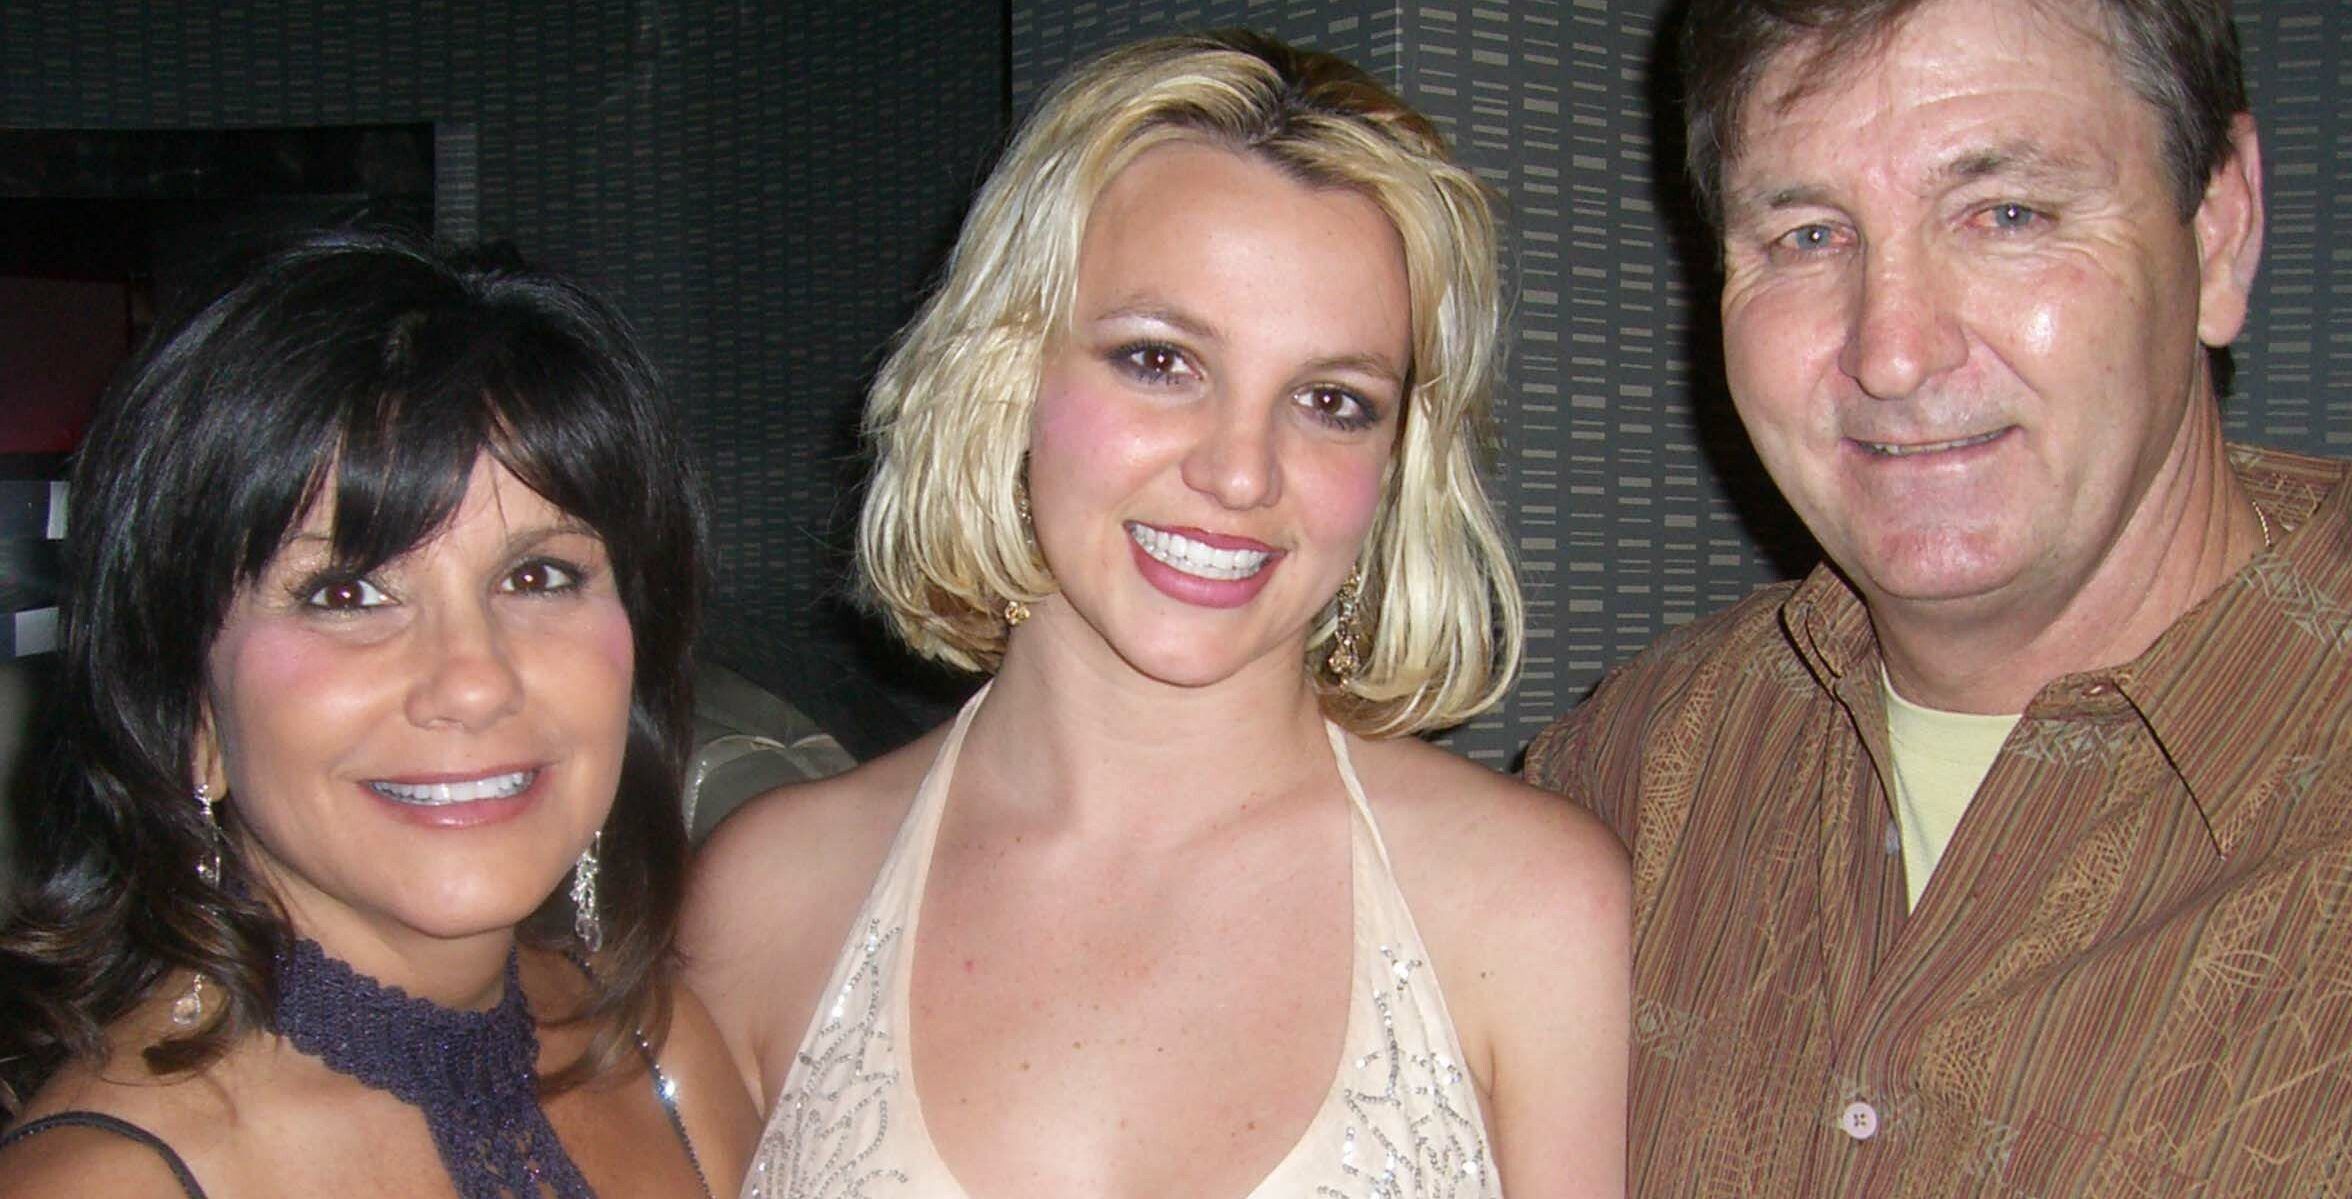 A Look At The NotSoGreat Relationship Between Britney Spears And Her